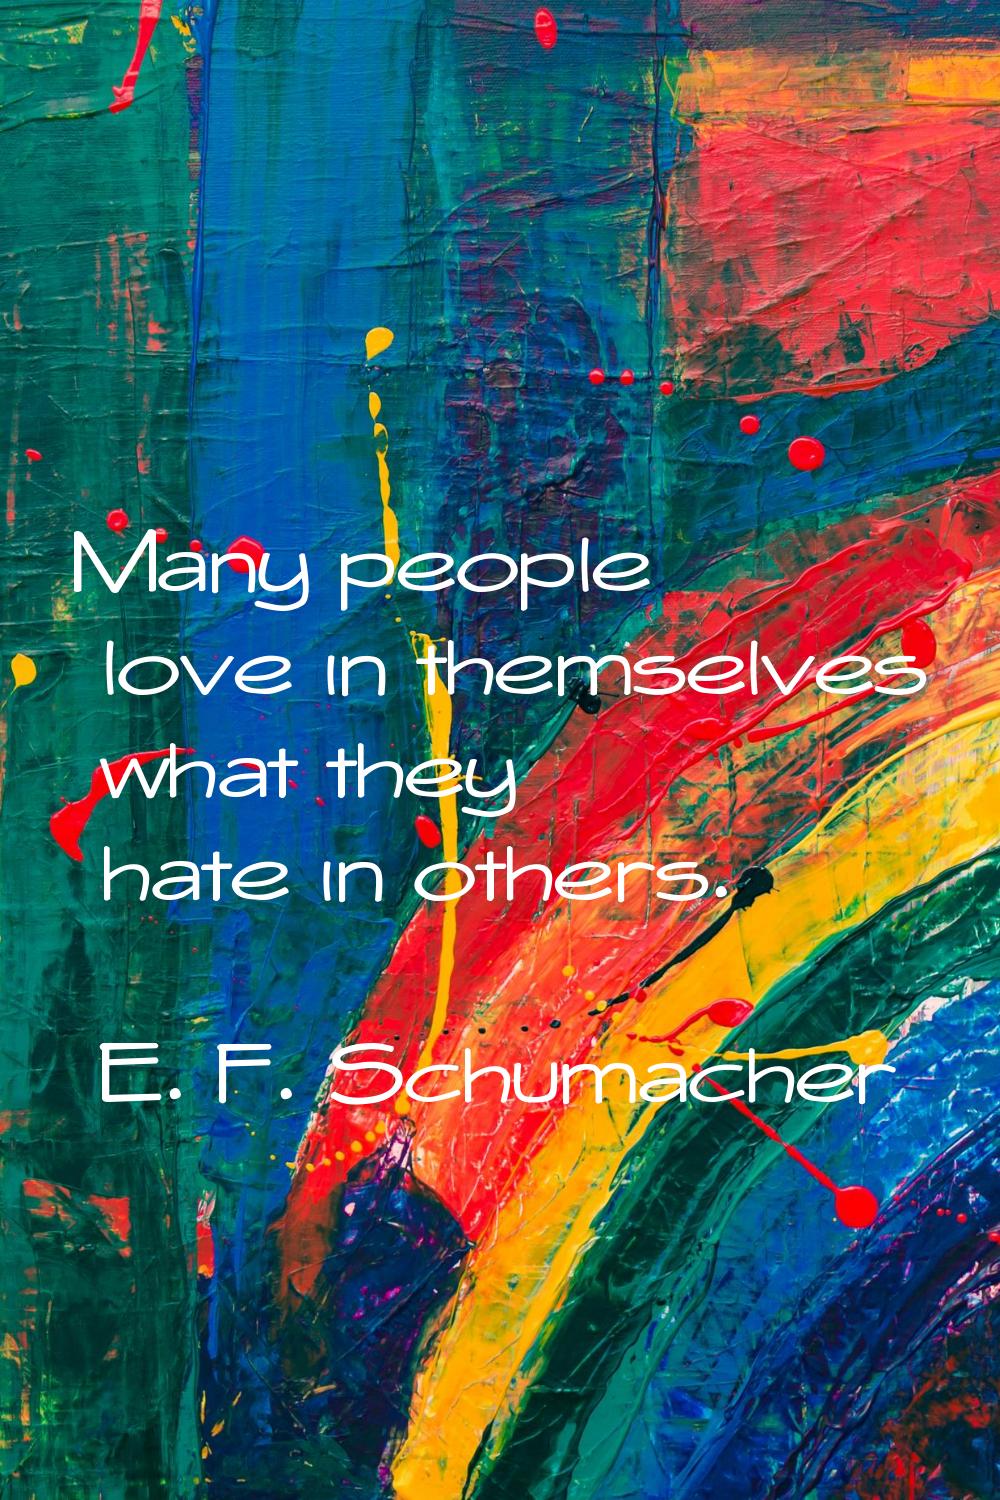 Many people love in themselves what they hate in others.